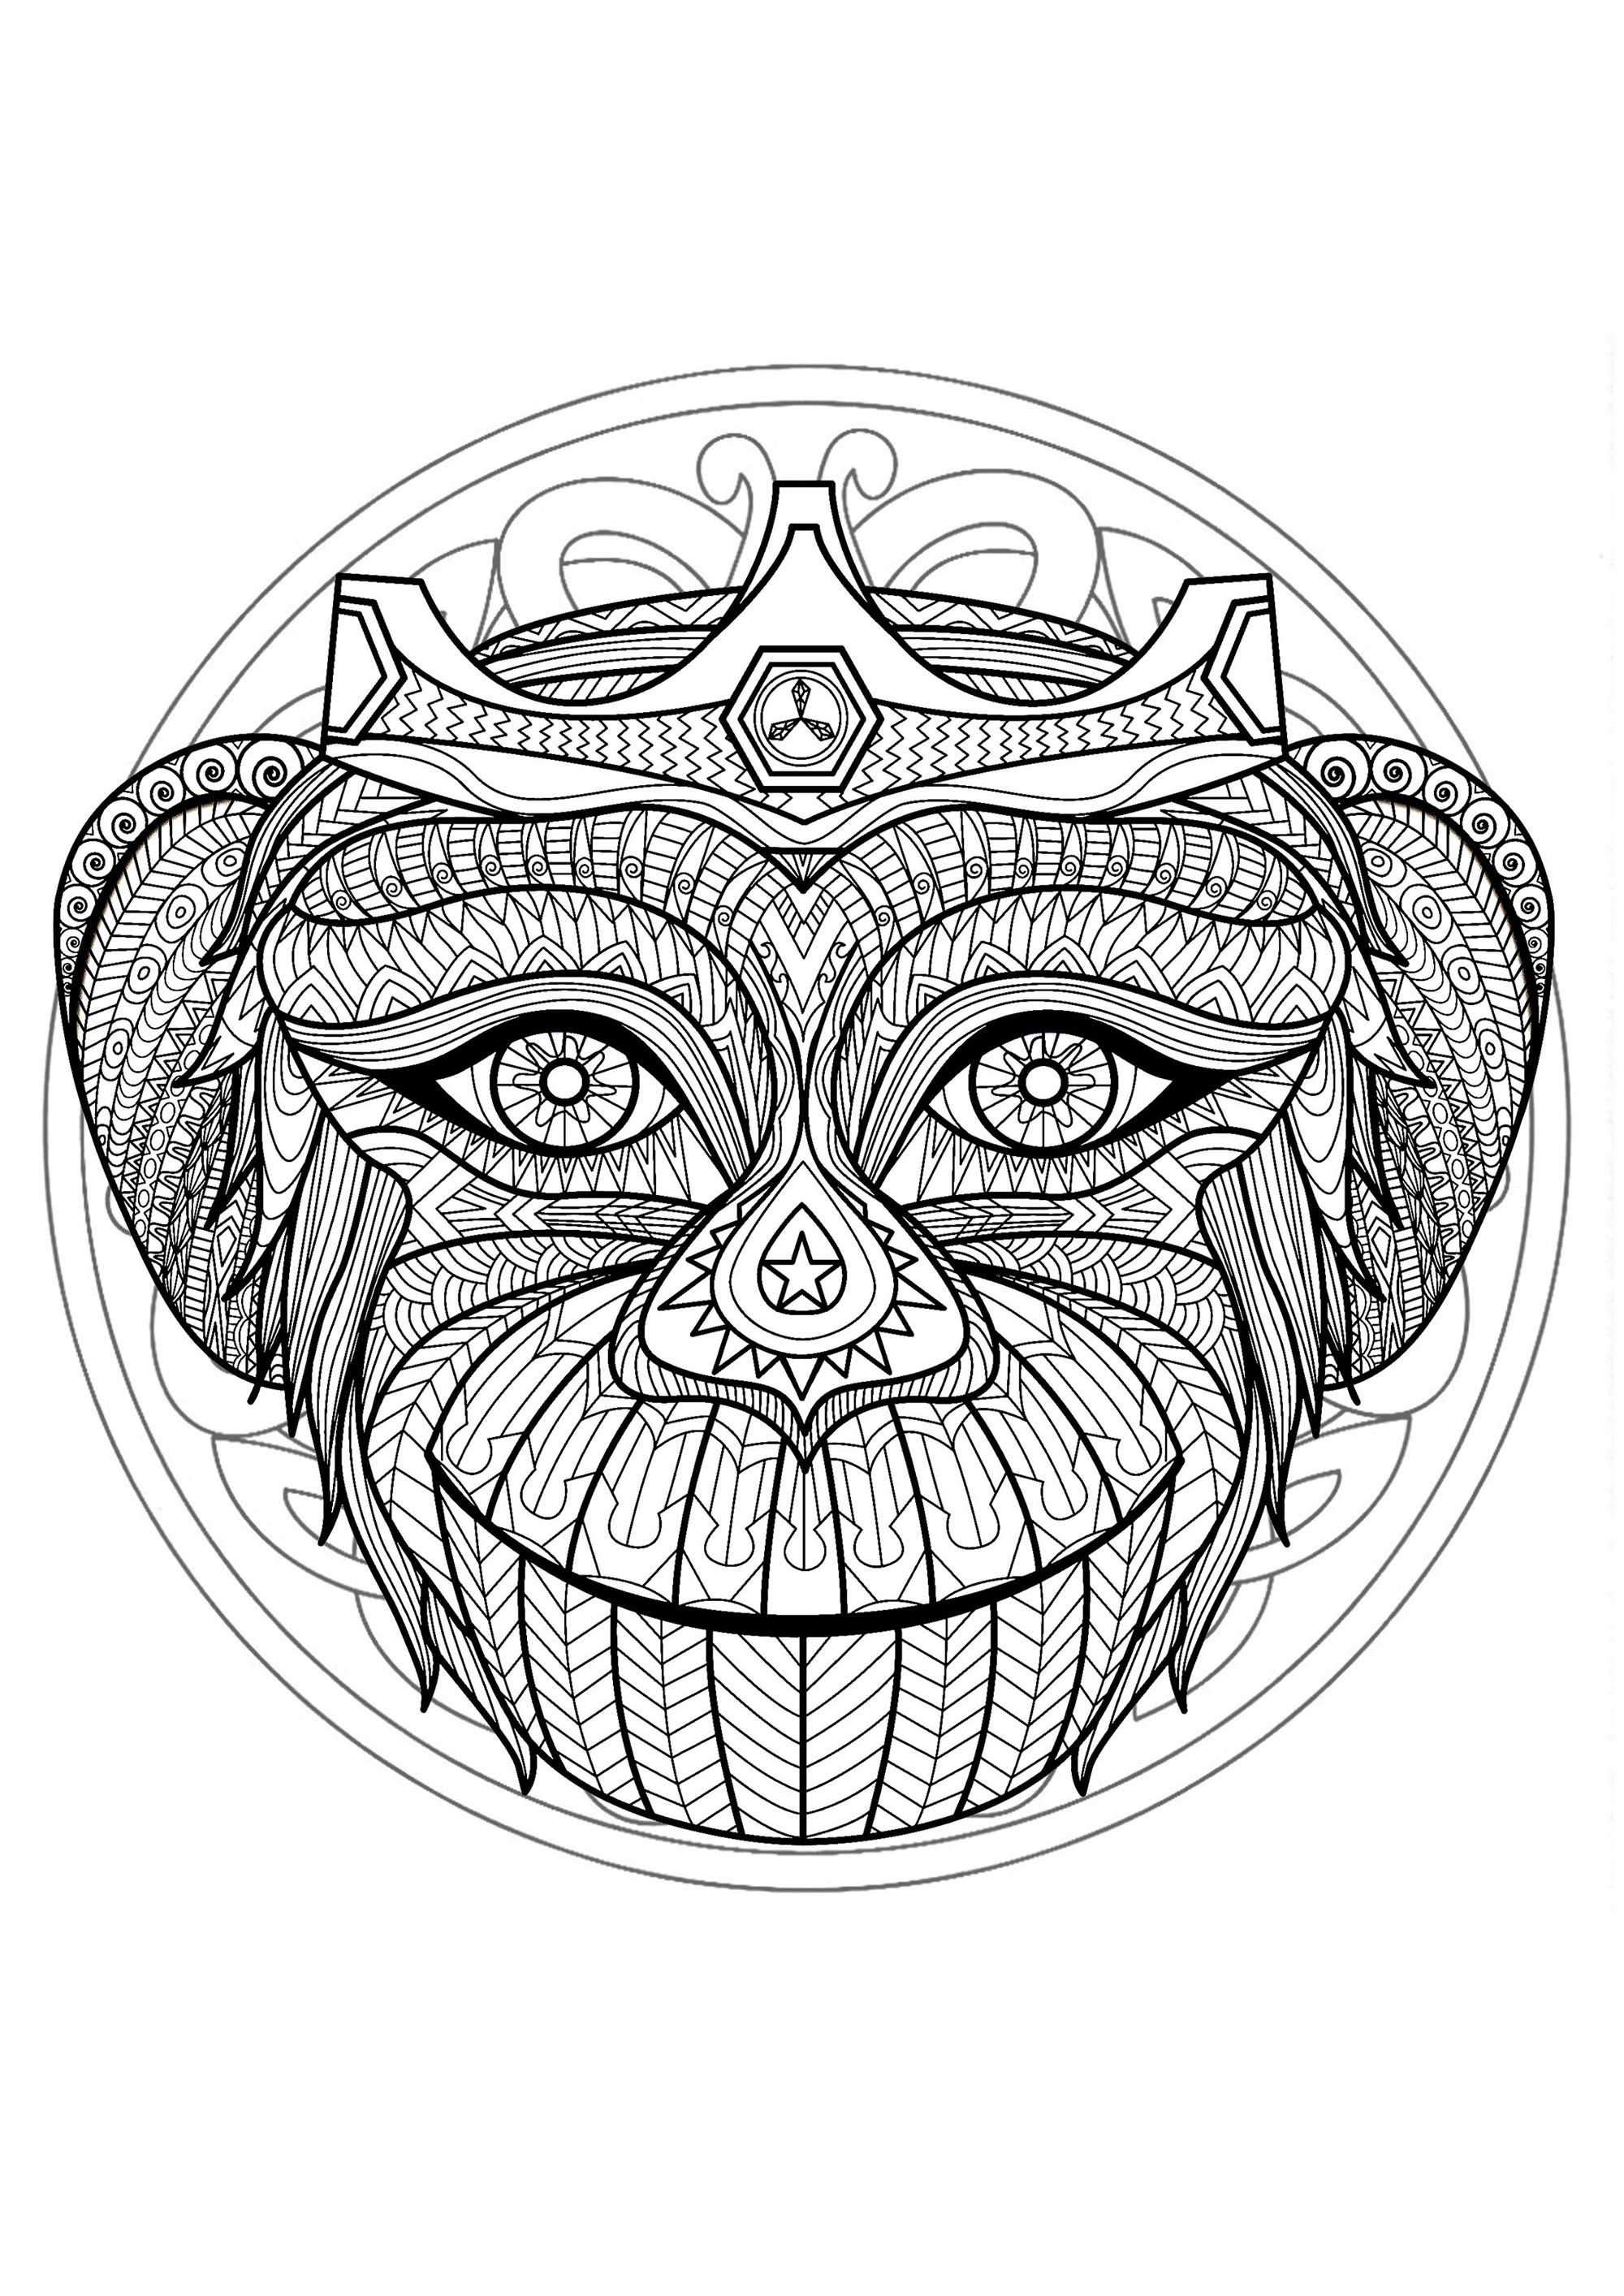 Monkey head in a difficult Mandala. Prepare your pens and pencils to color this Mandala full of small details and intricate areas. Feel free to let your instincts decide where to color, and what colors to choose.